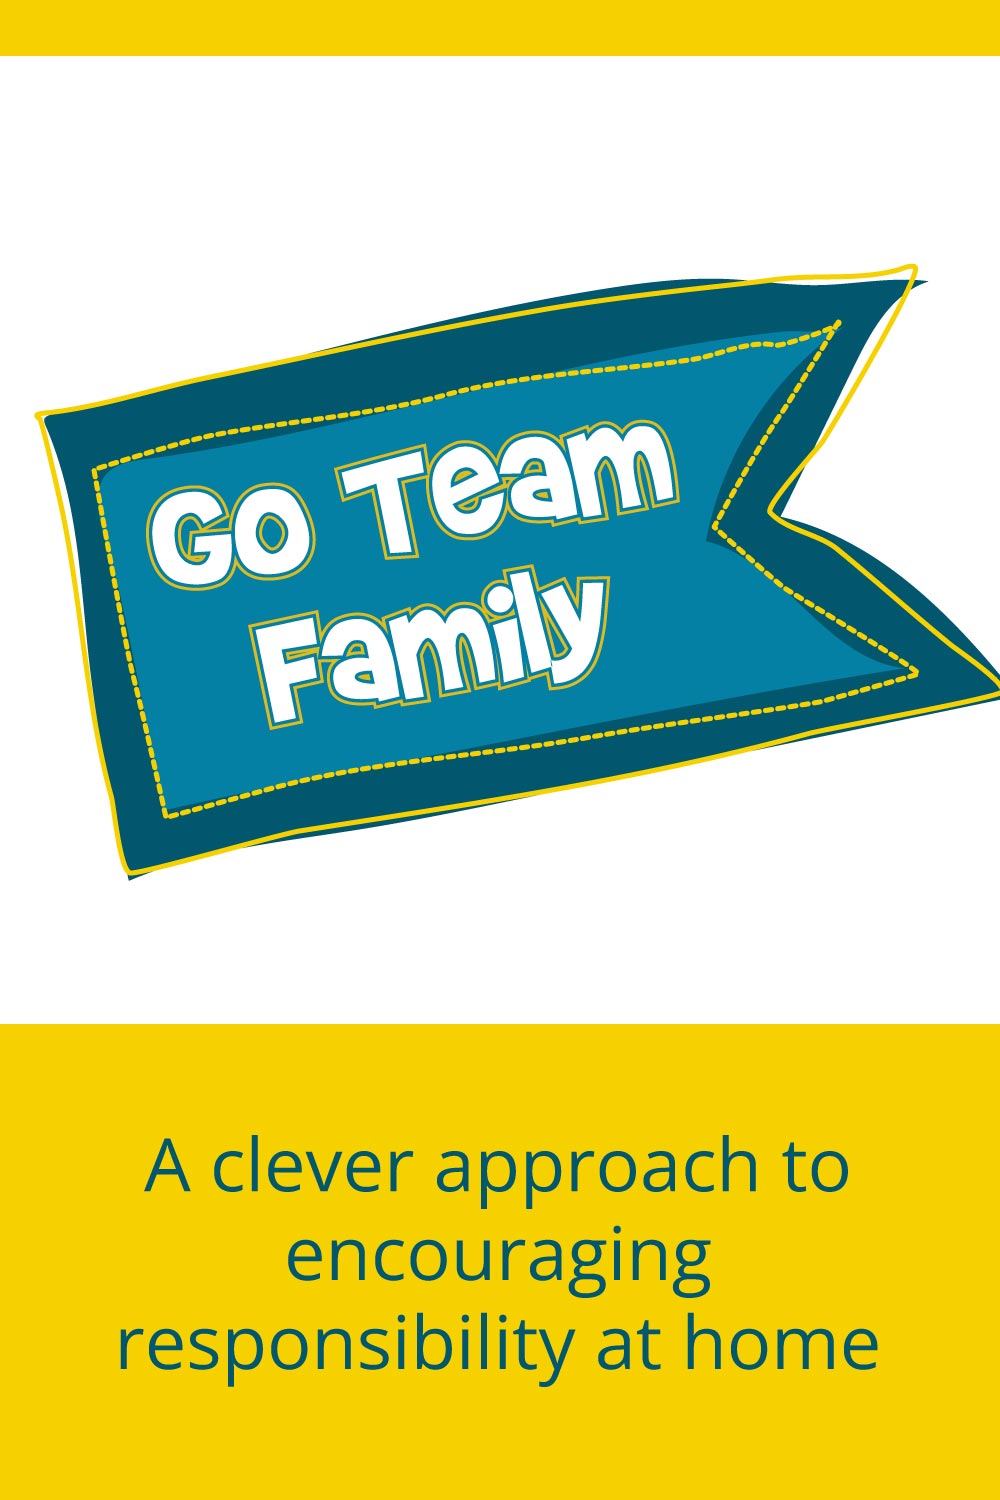 Go Team Family- Character and Values technique tha teaches the value of Responsibility